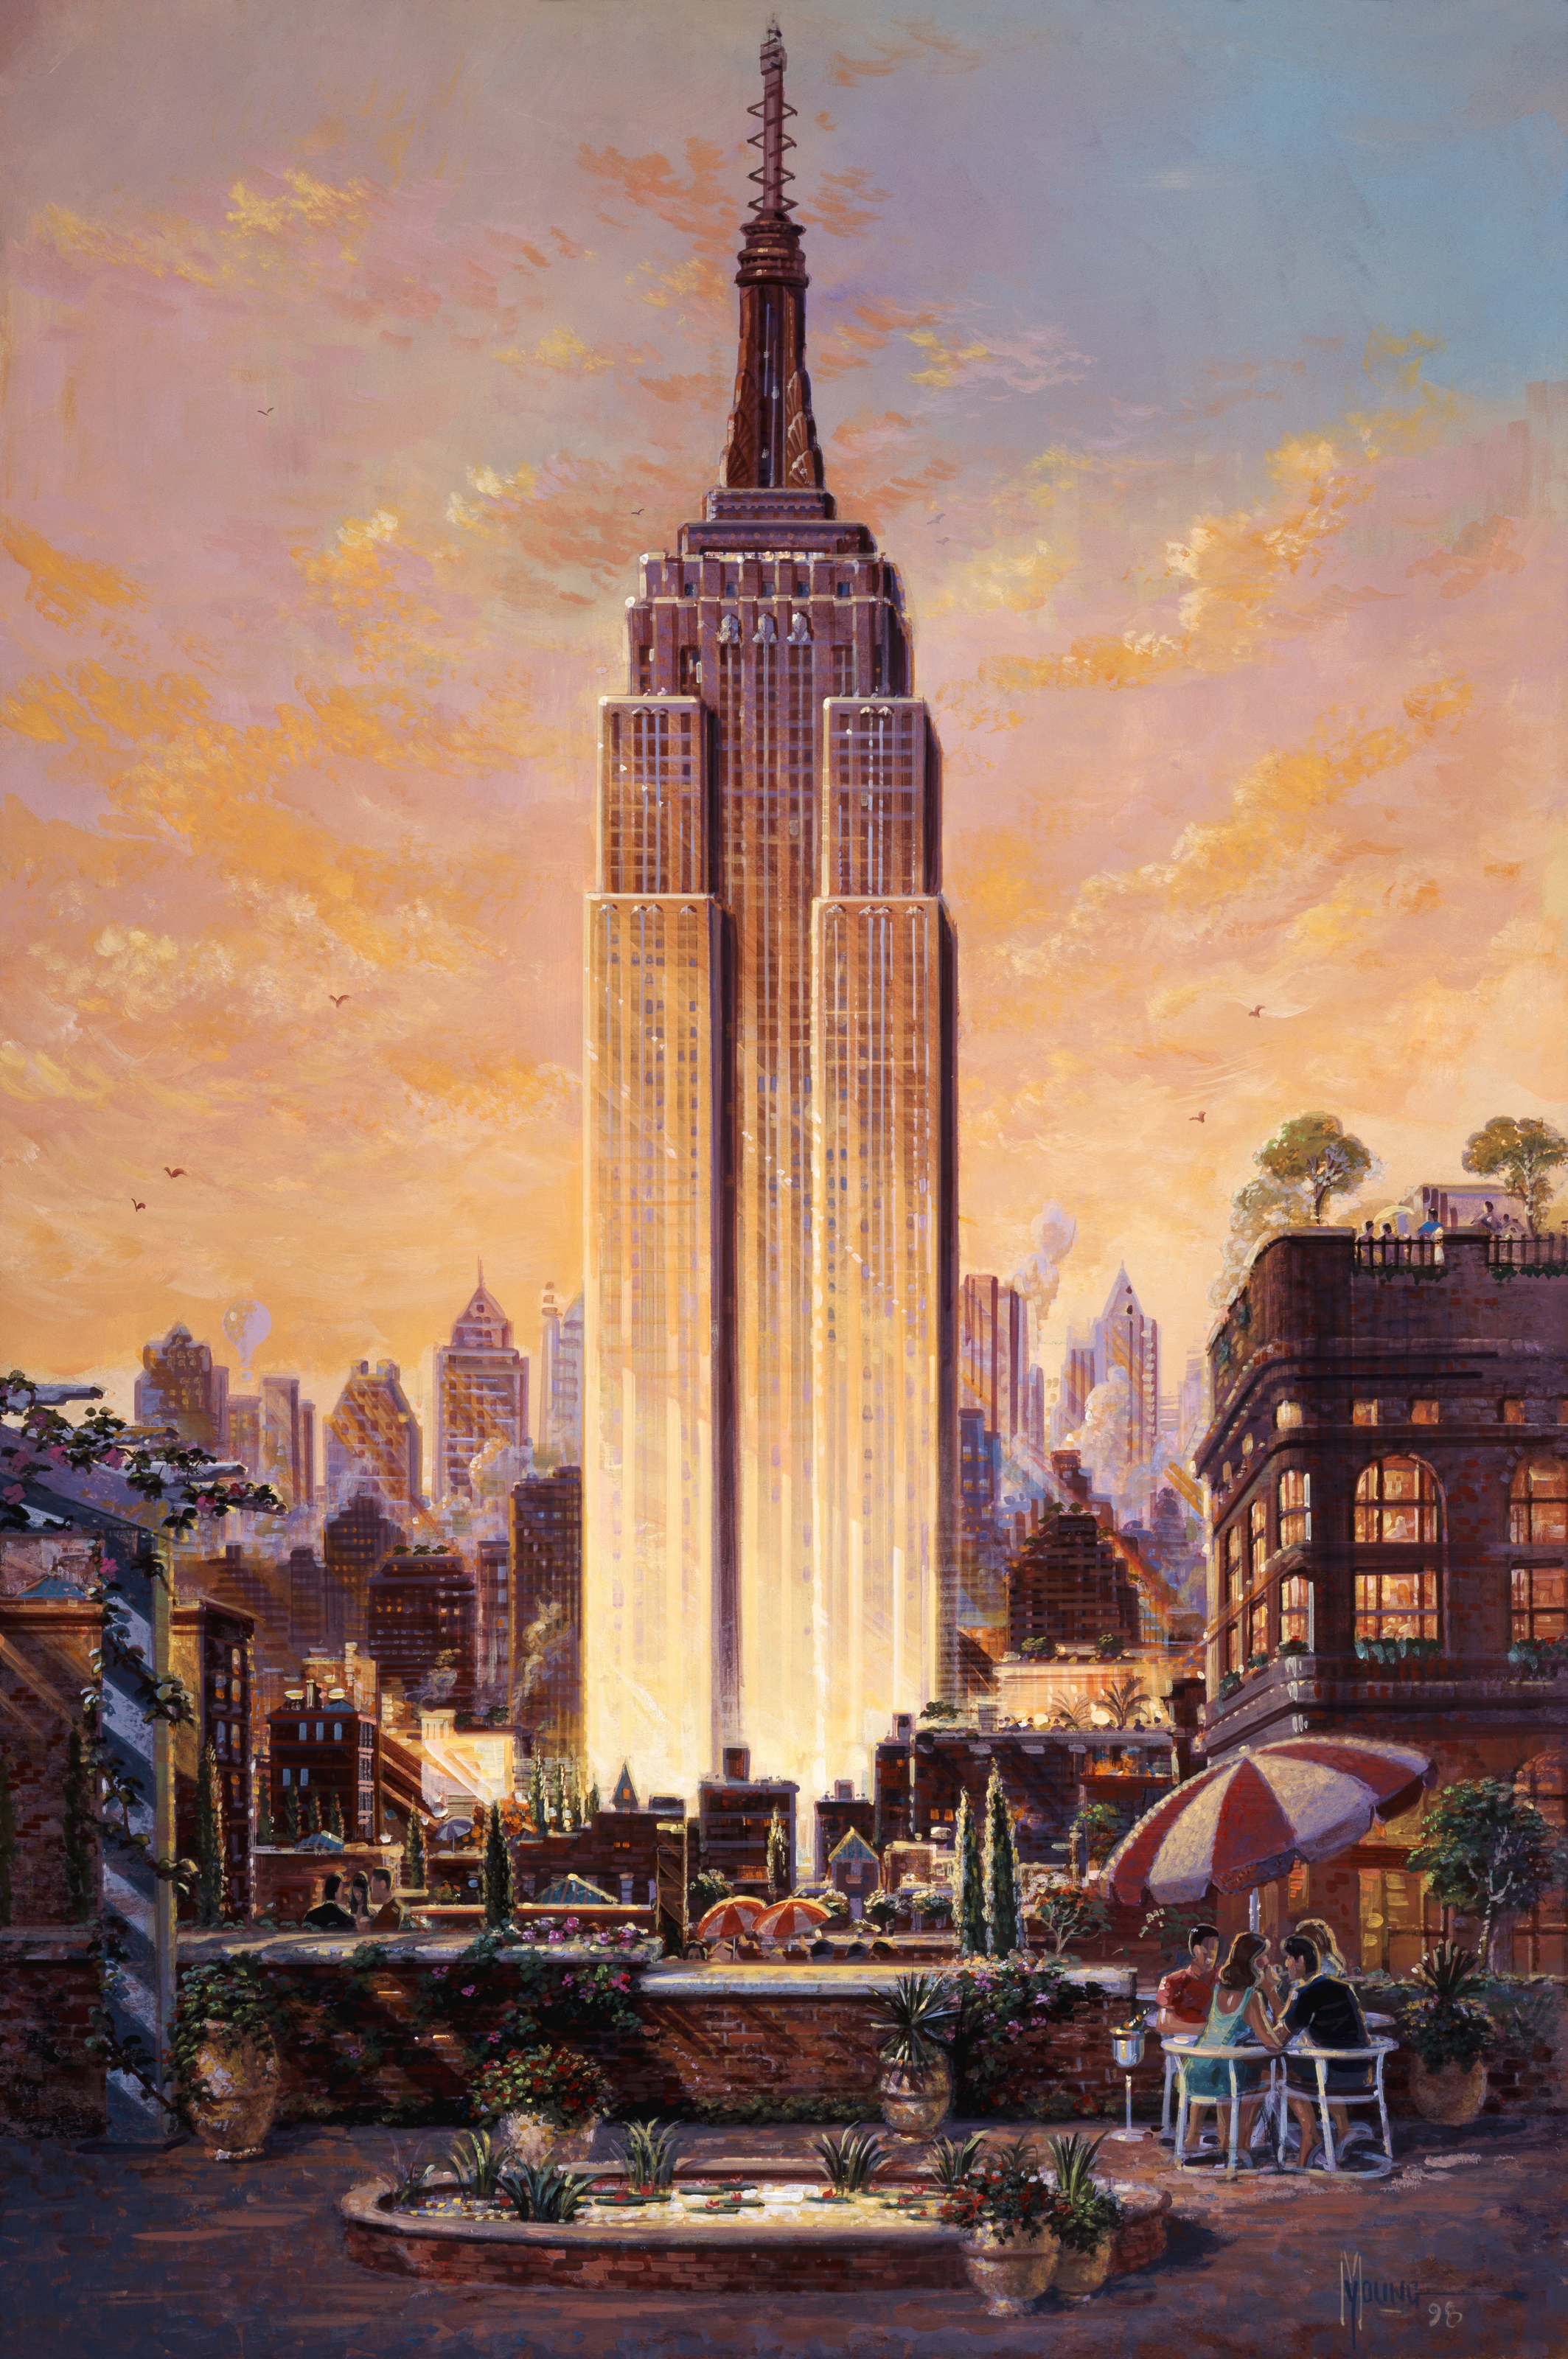 Empire State Way - Your Murals Mural